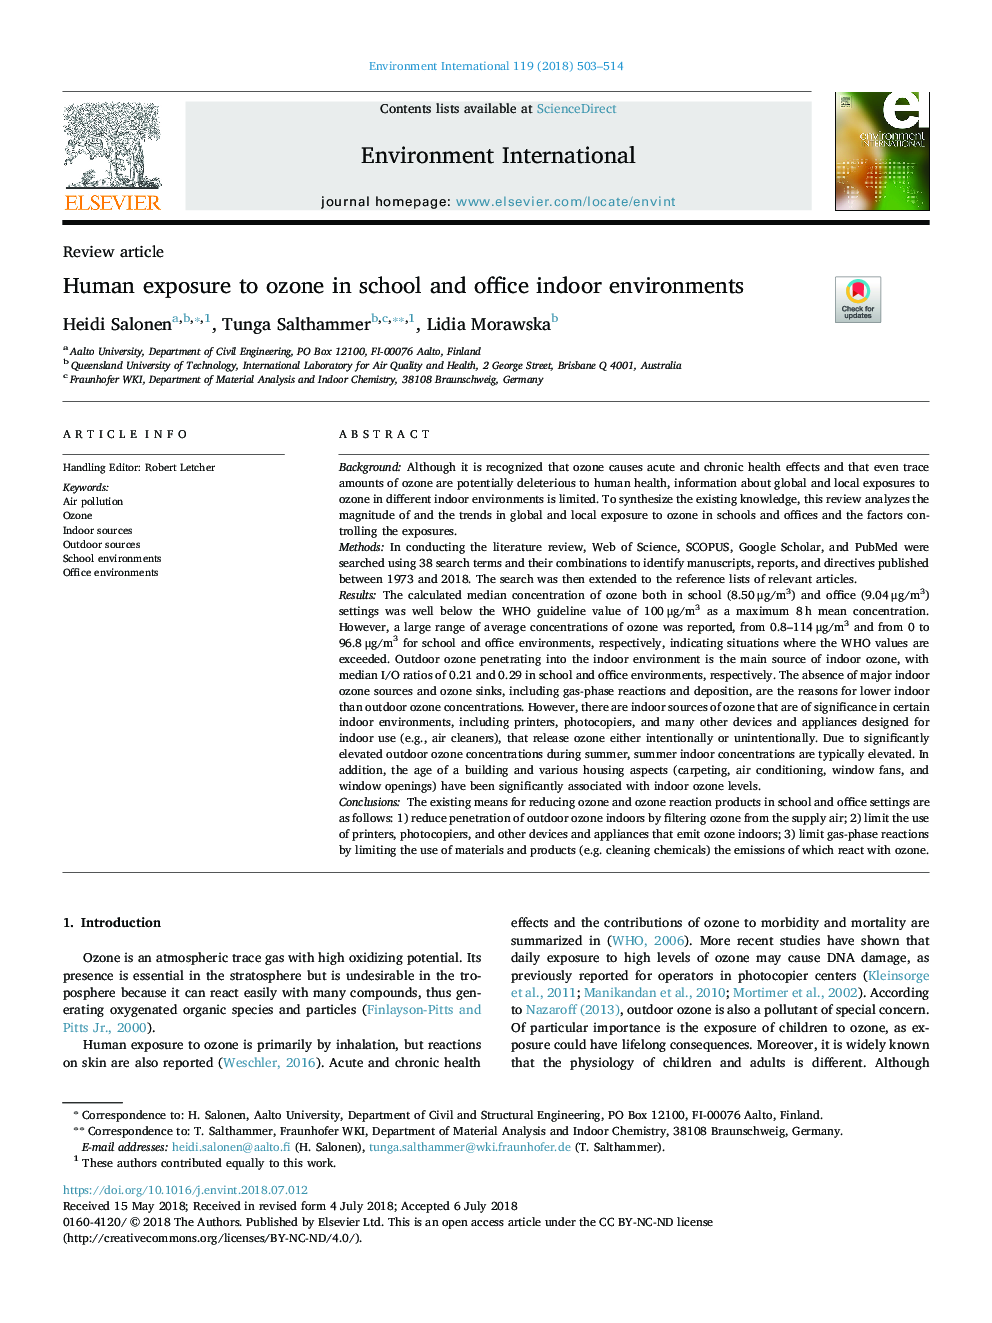 Human exposure to ozone in school and office indoor environments